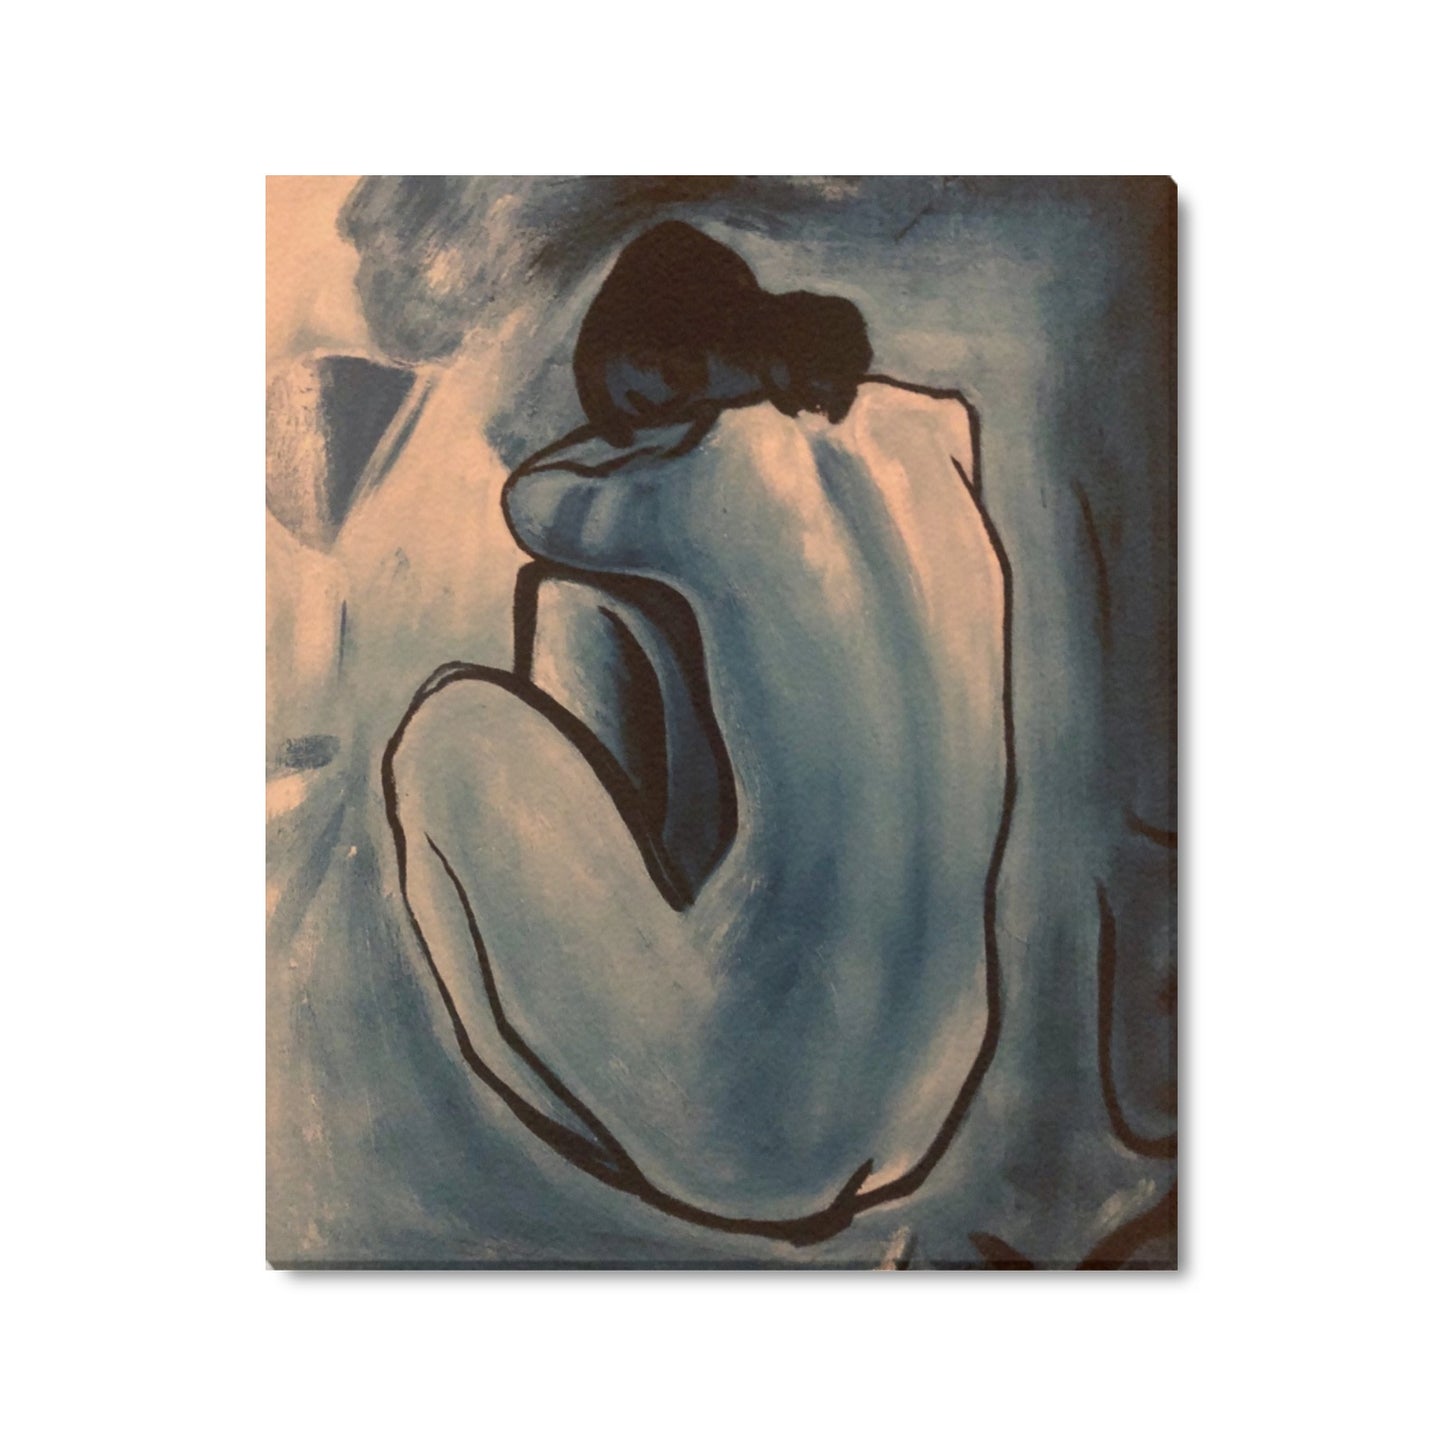 PABLO PICASSO - BLUE NUDE - WRAPPED CANVAS PRINT 20" x 24"